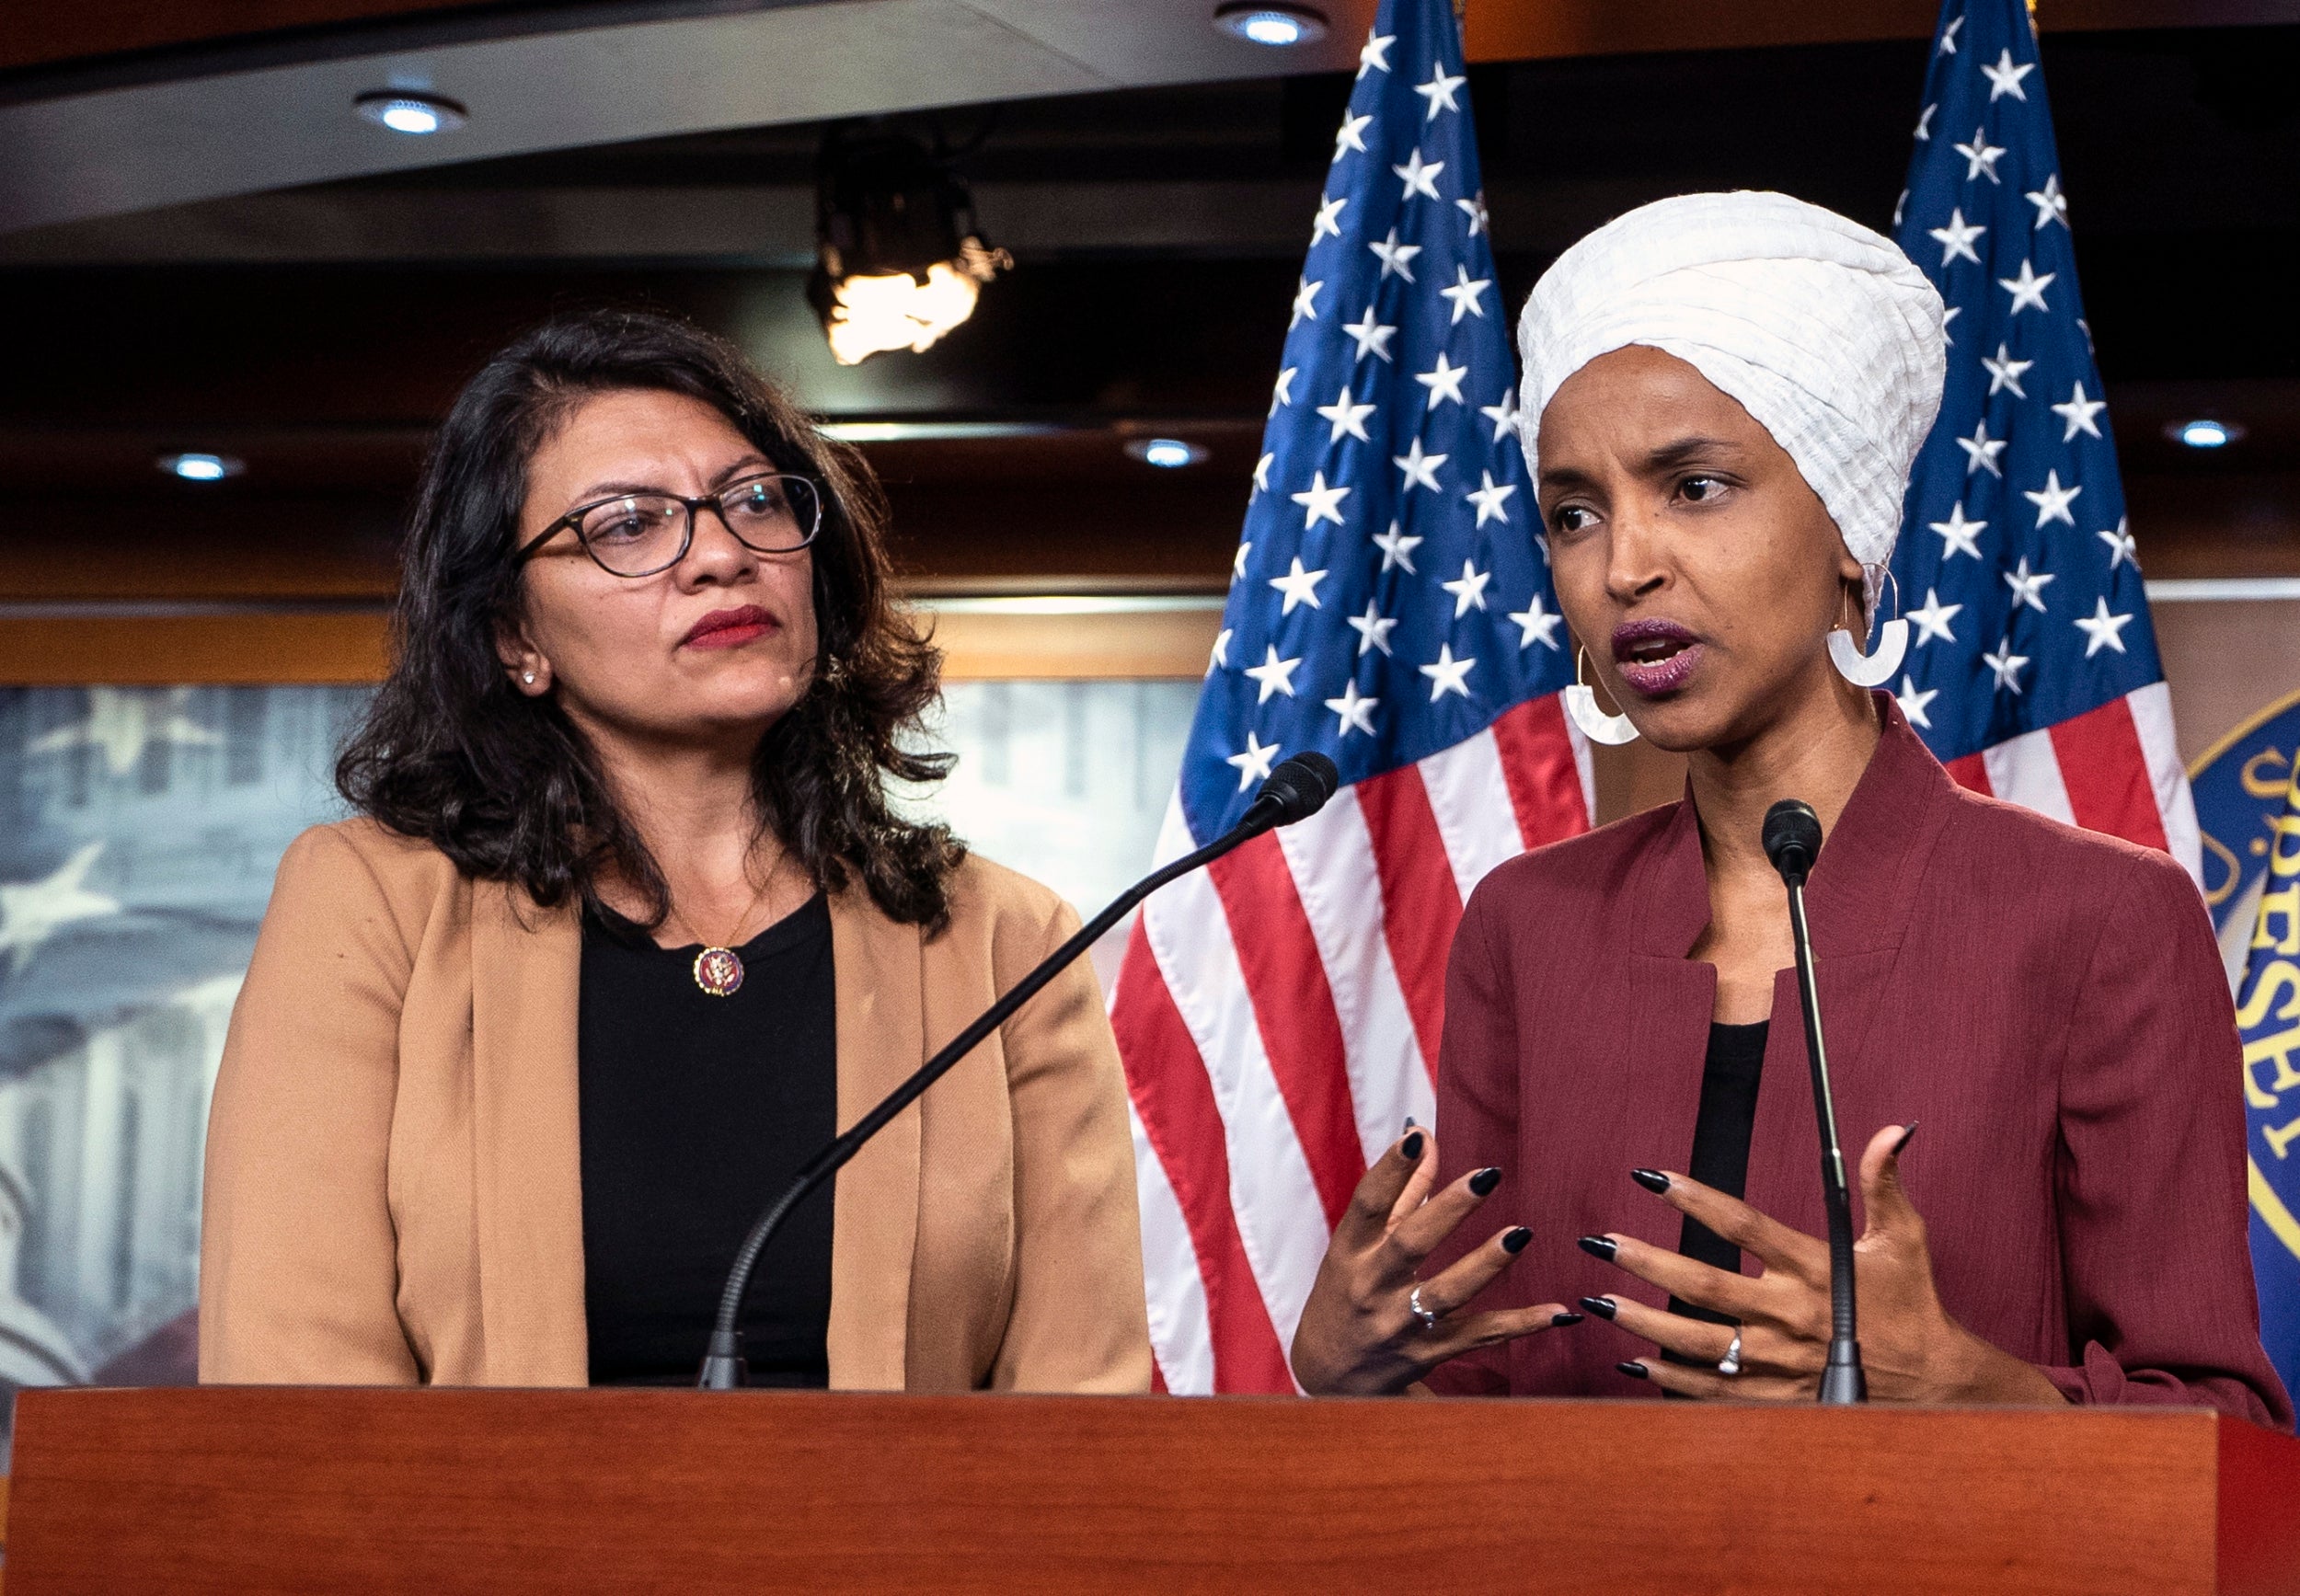 'Hang these traitors': Outrage over Republican campaign email threatening Ilhan Omar